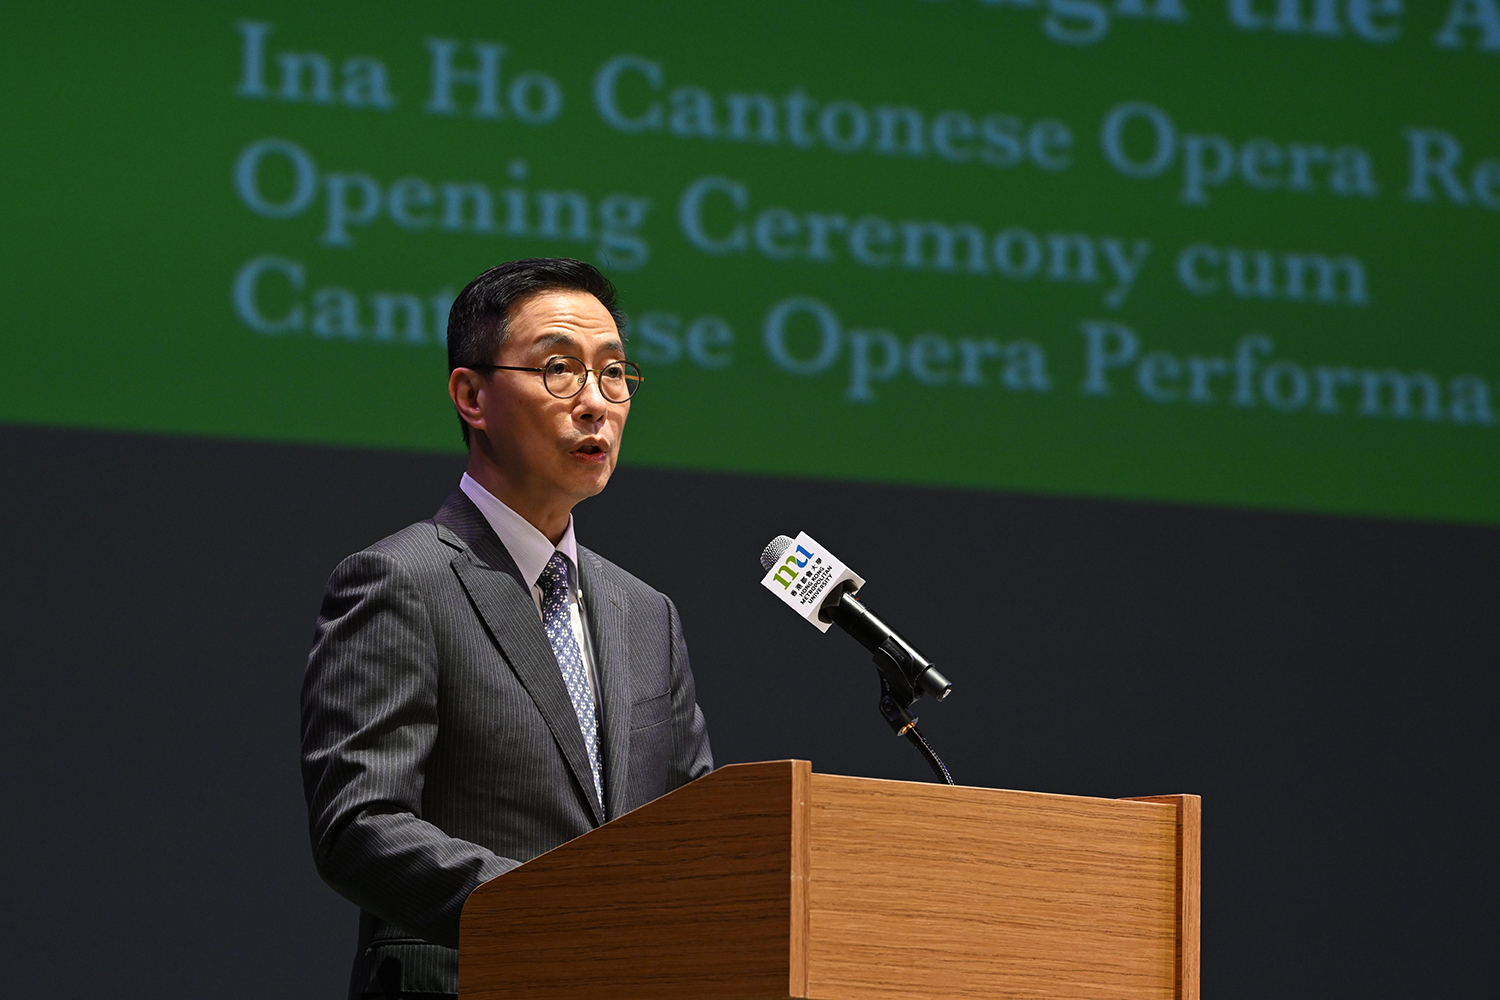 Kevin Yeung Yun-hung extends his congratulations on the opening of the Research Centre.